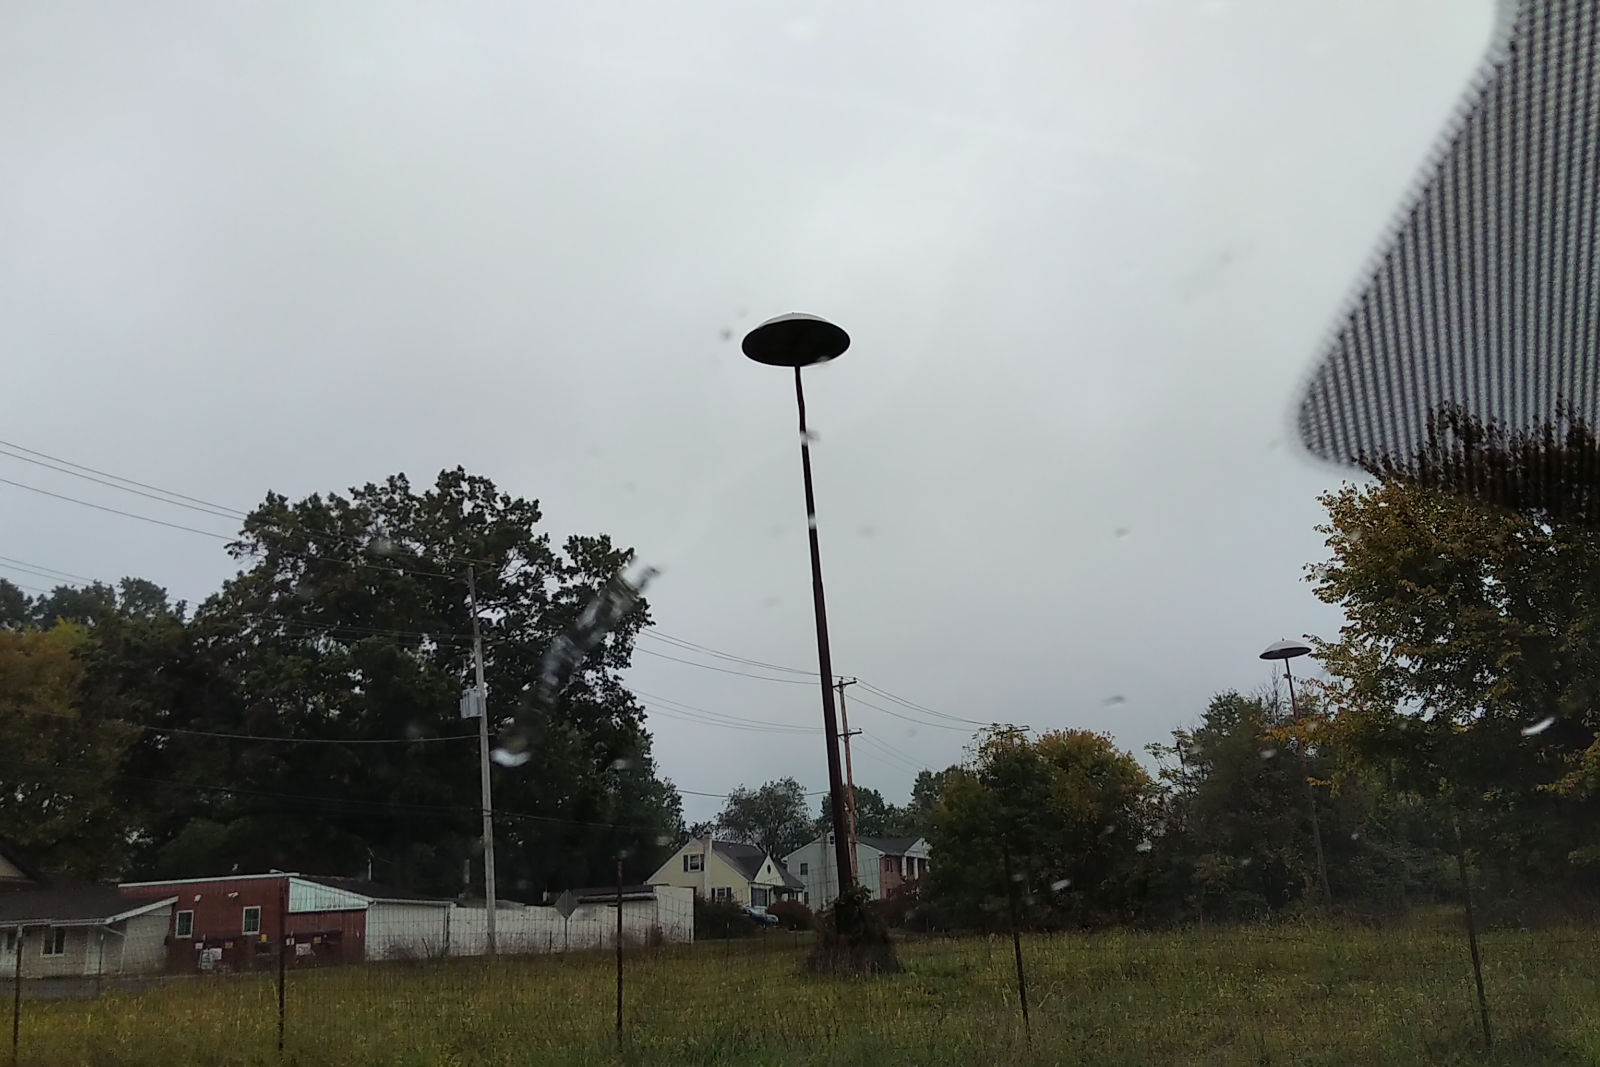 There’s a few of these flying saucer-like light poles still standing in the overgrown parking lot